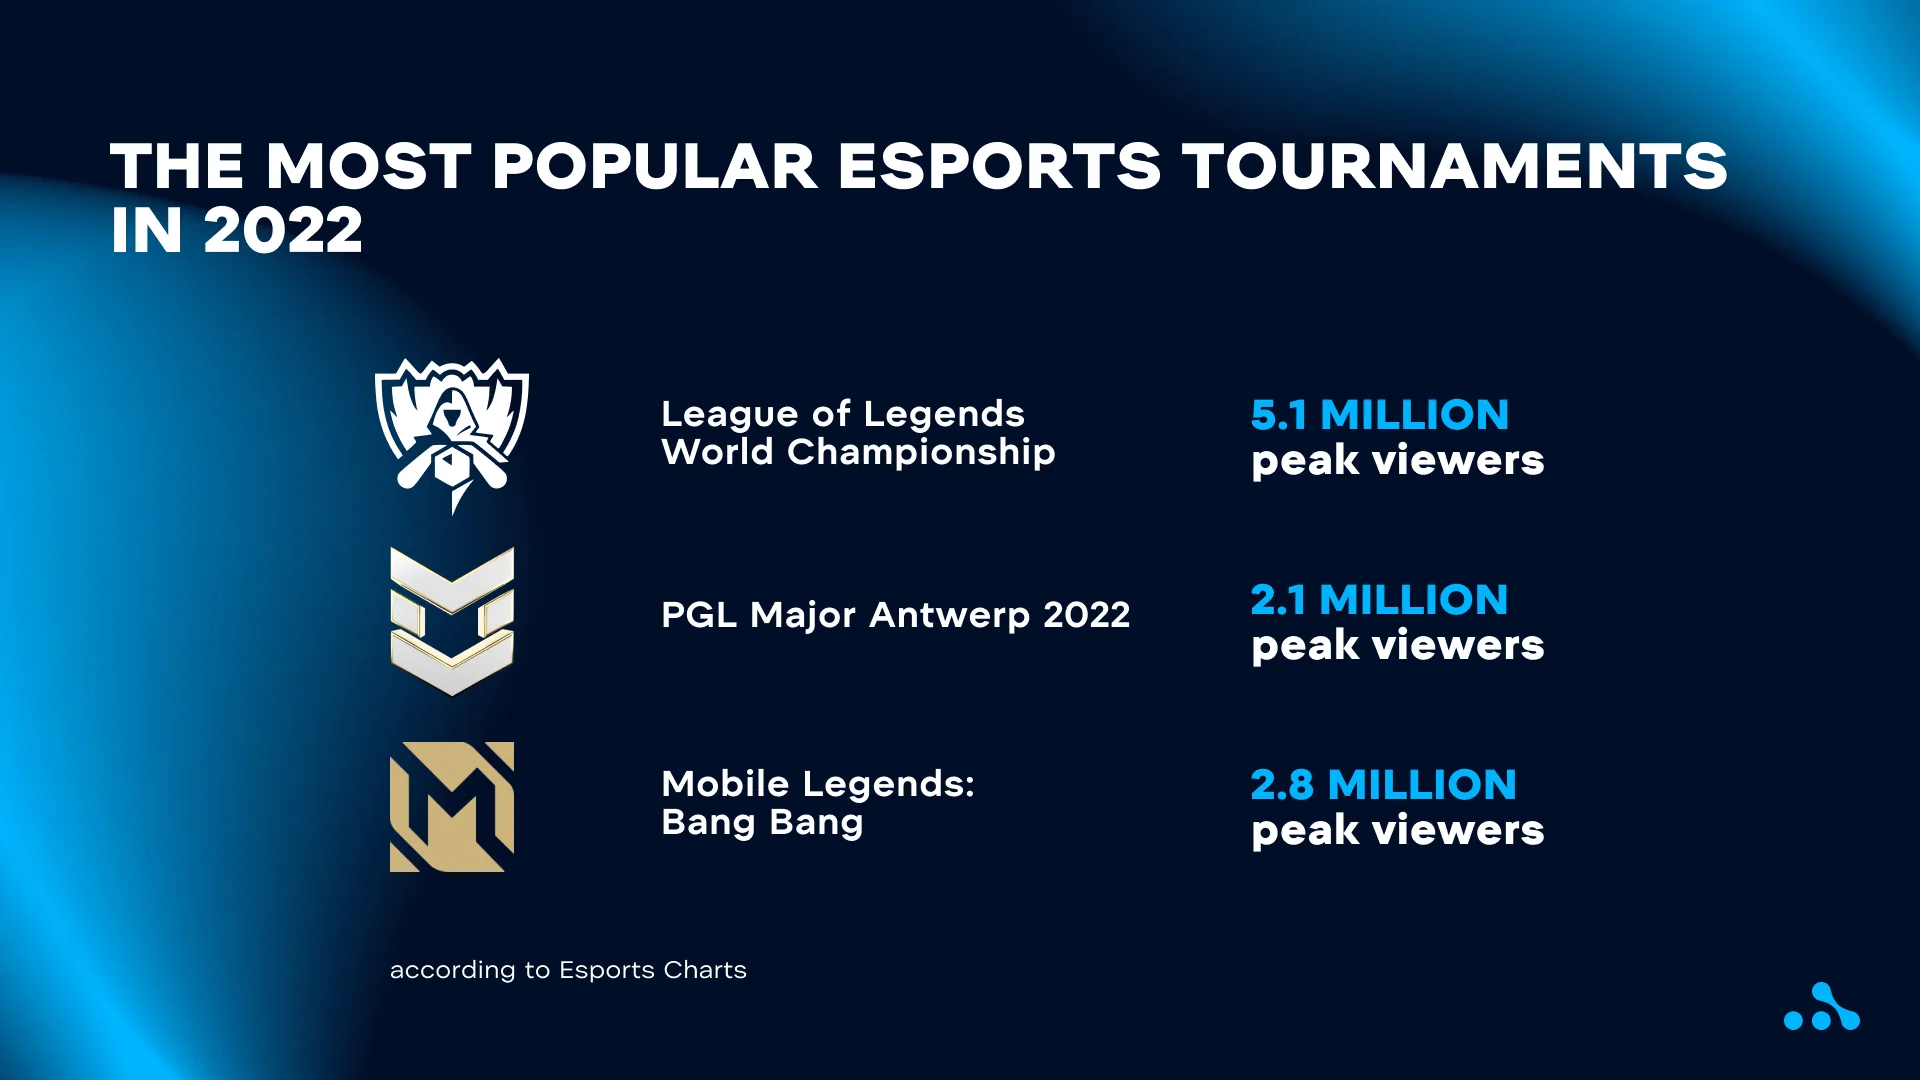 The most popular esports tournaments in 2022. Credit: WePlay Holding